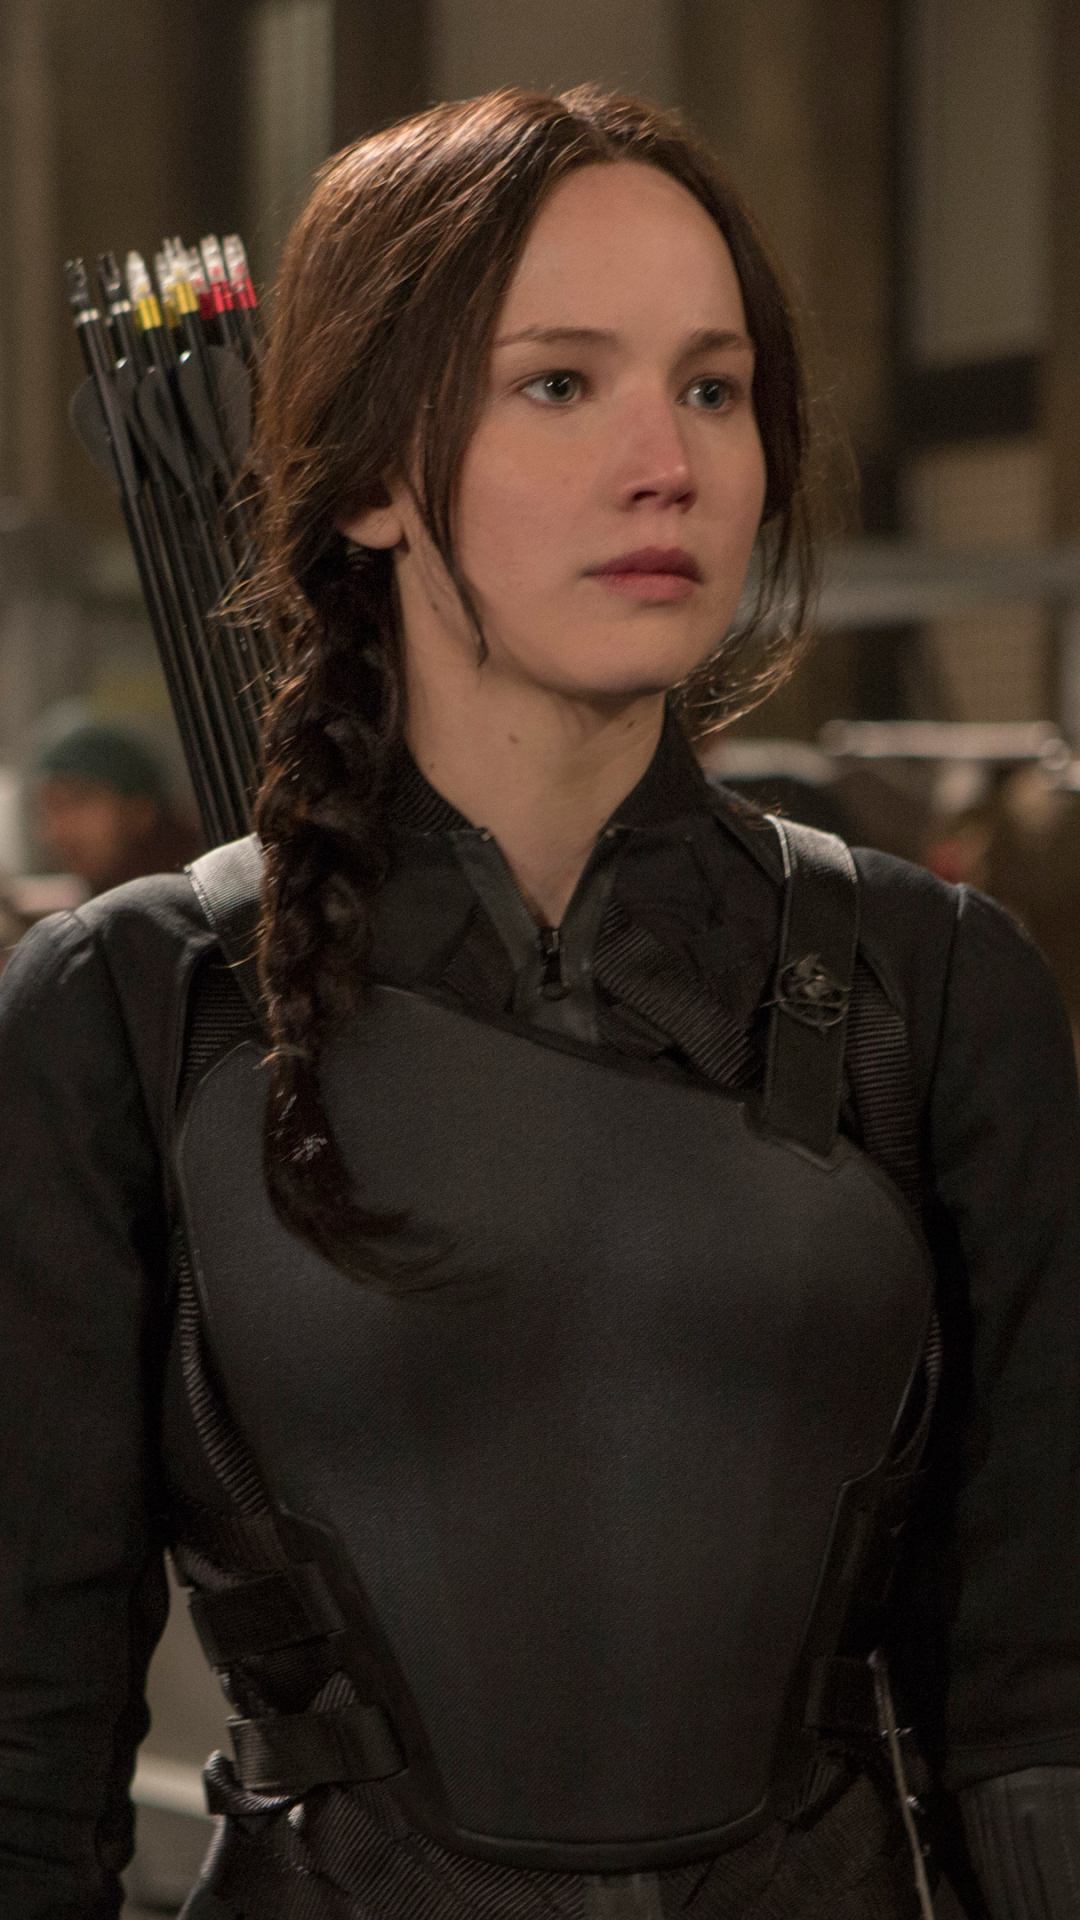 The Hunger Games: Mockingjay - Part 2 Phone Wallpaper - Mobile Abyss